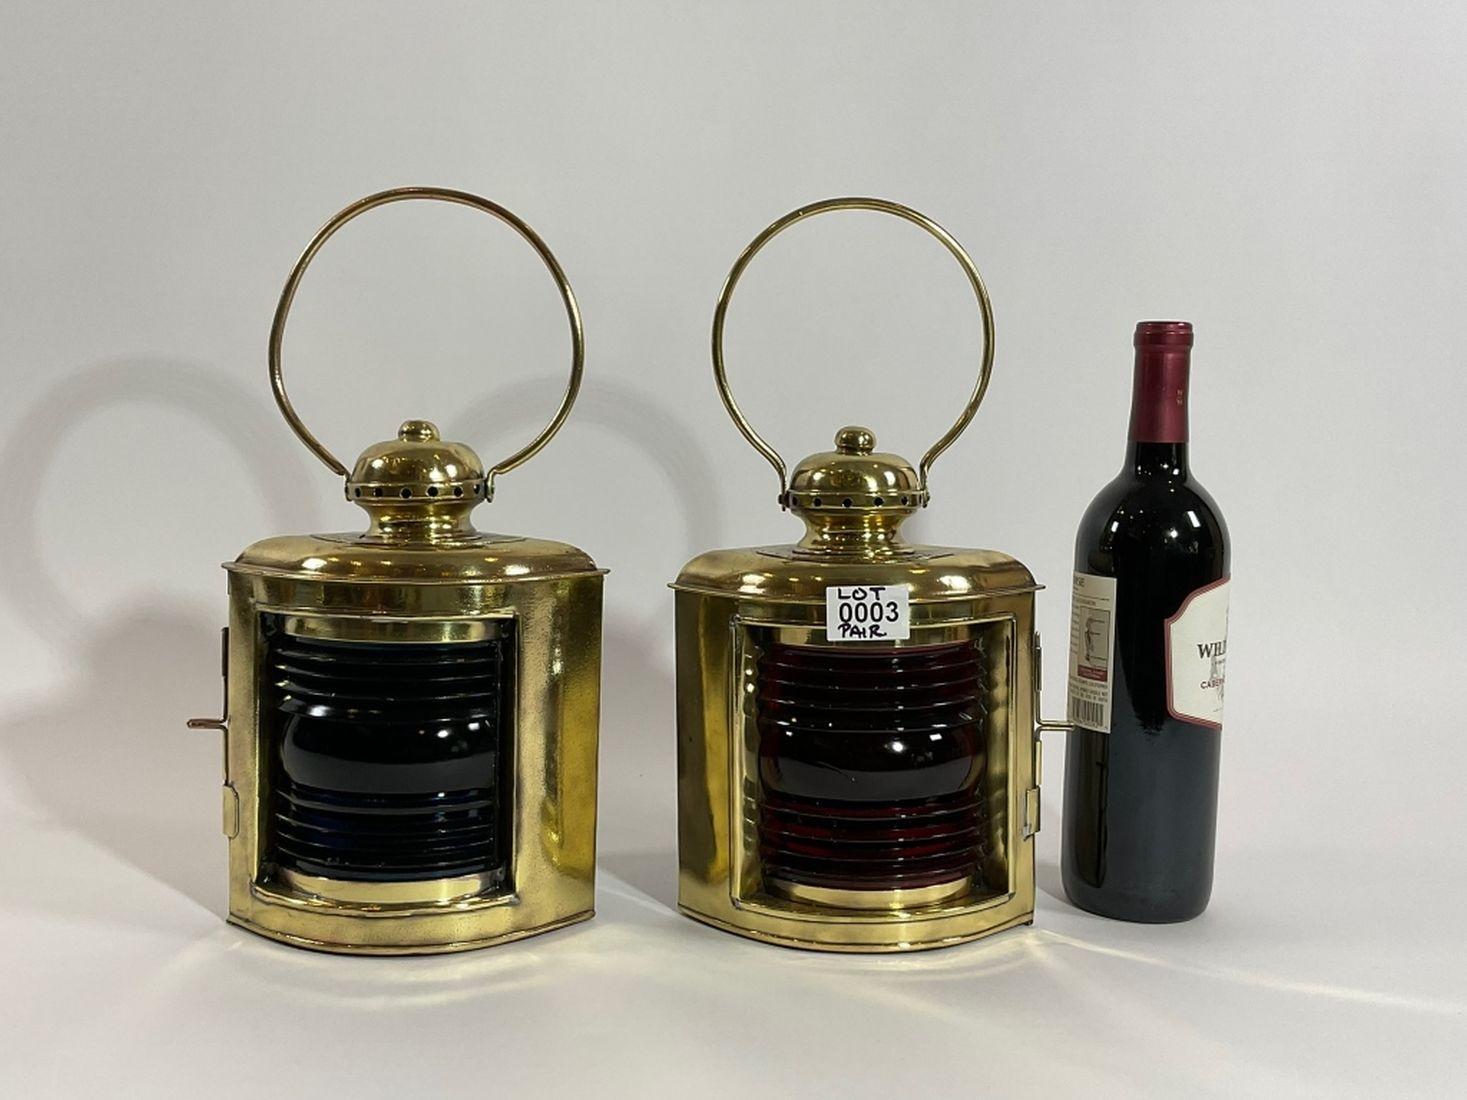 Fine pair of polished brass port and starboard boat lanterns with richly colored ruby red and blue lenses. Fitted with vented tops with hoop carry handles. Engraved on rear 